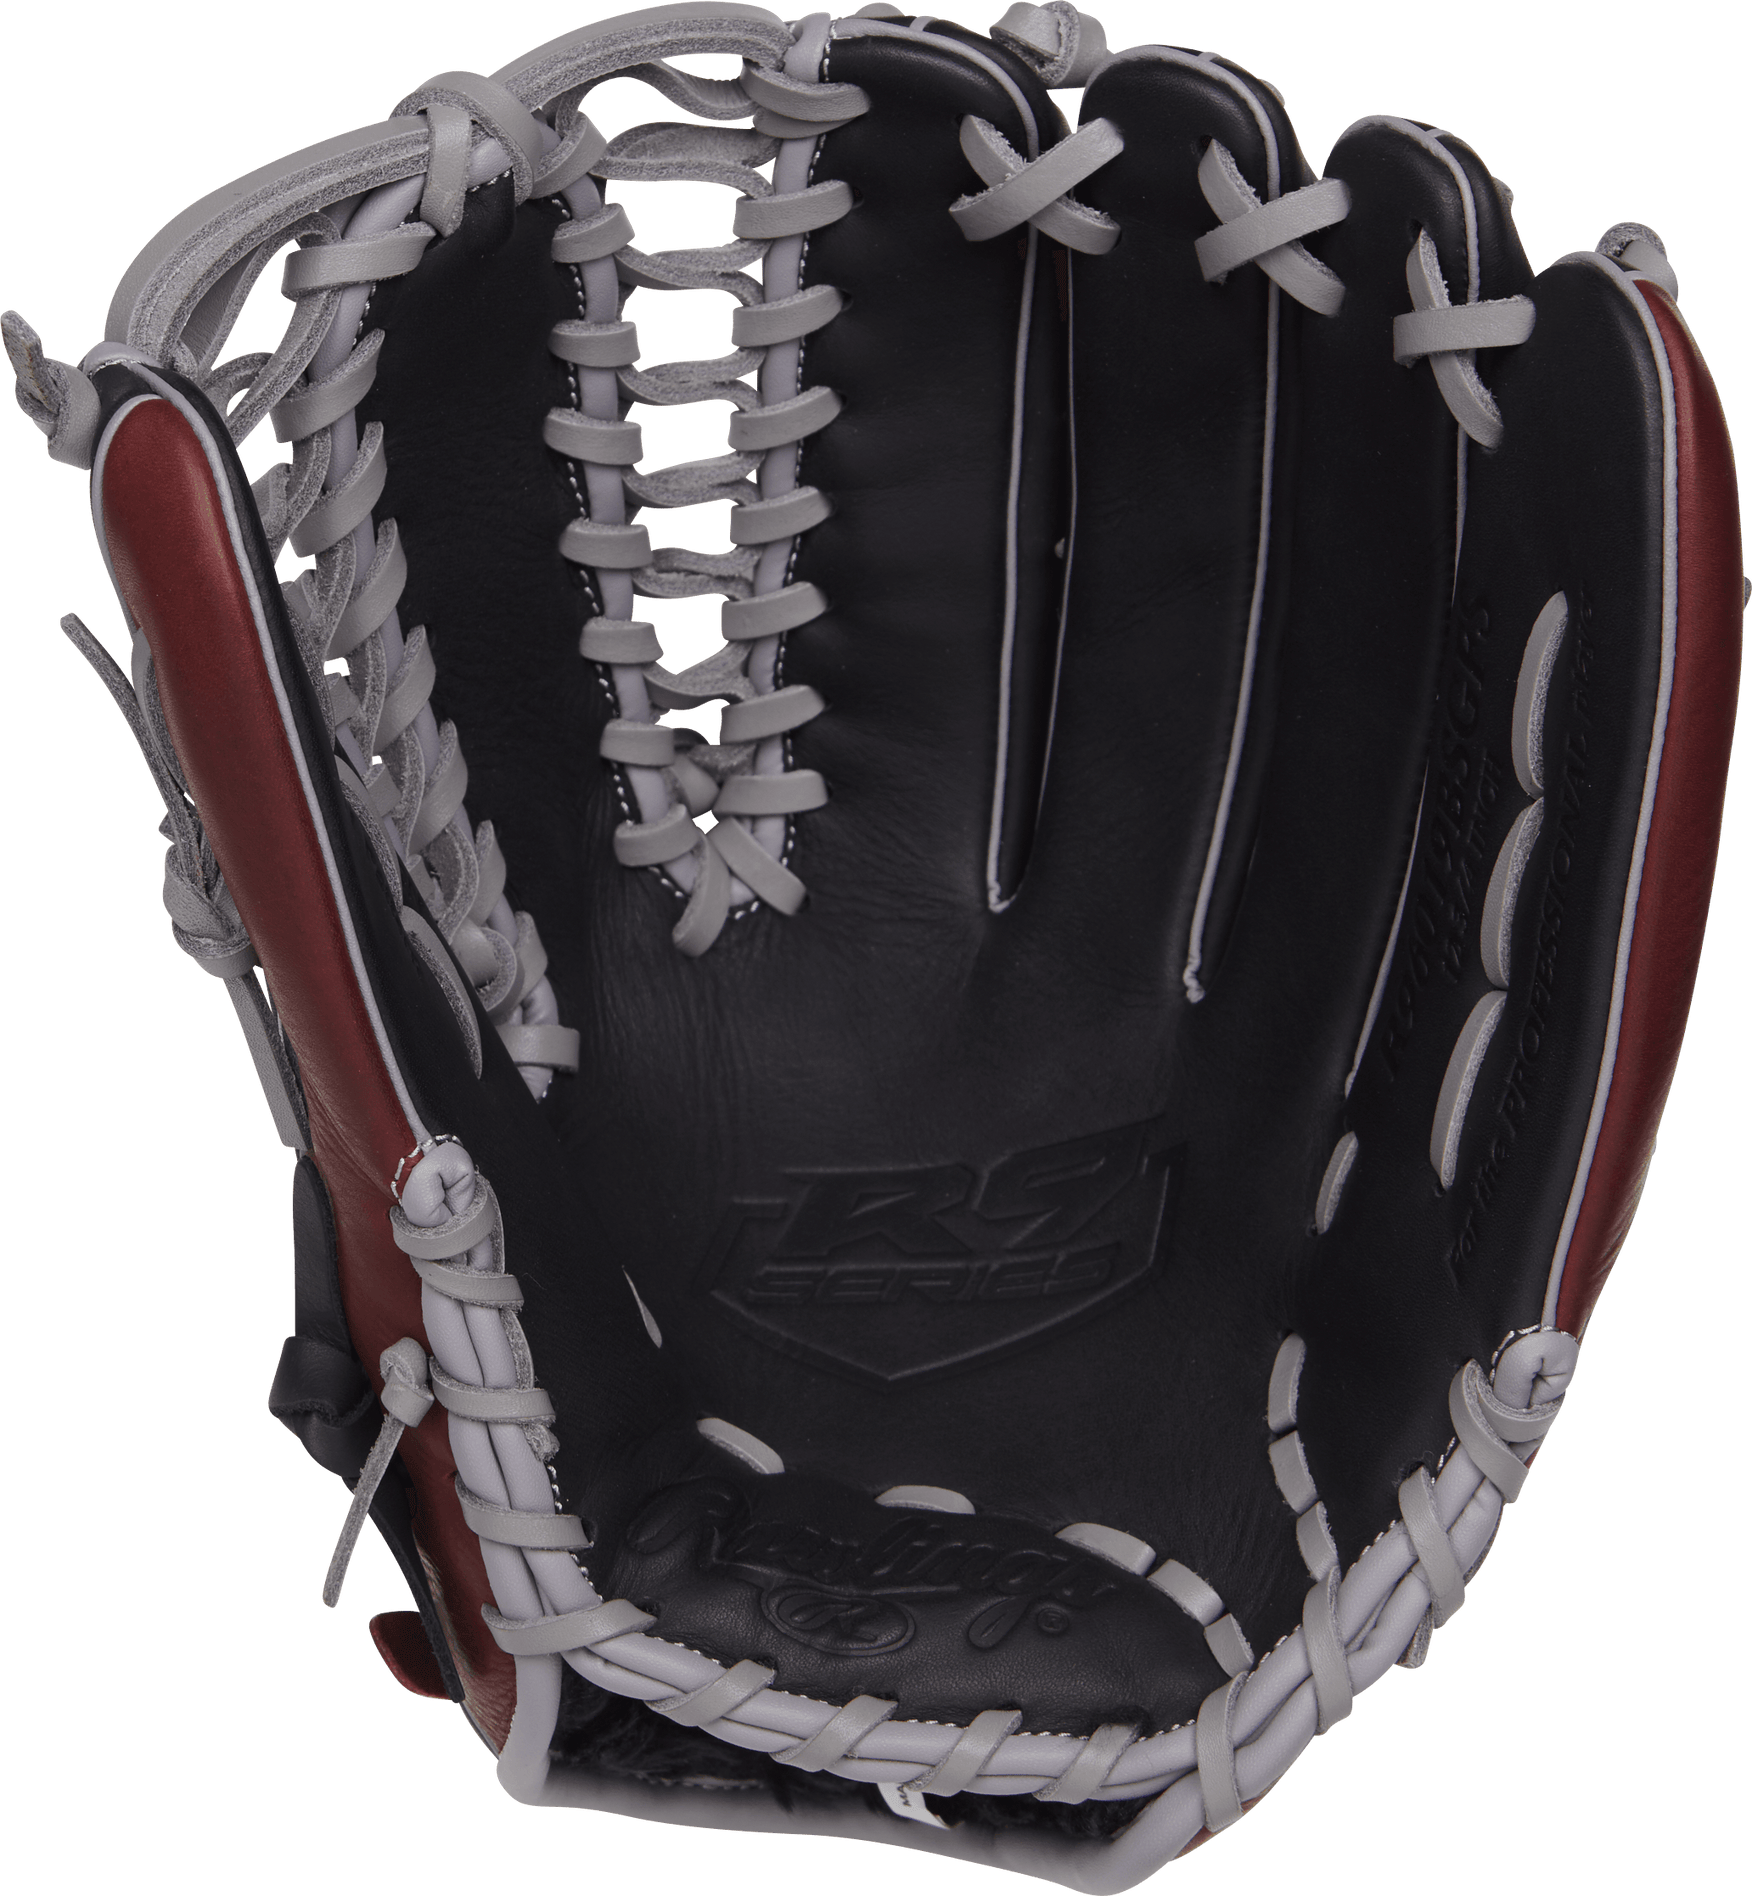 R9 Series 12.75-Inch 601-Pattern Outfield Glove - Sports Excellence